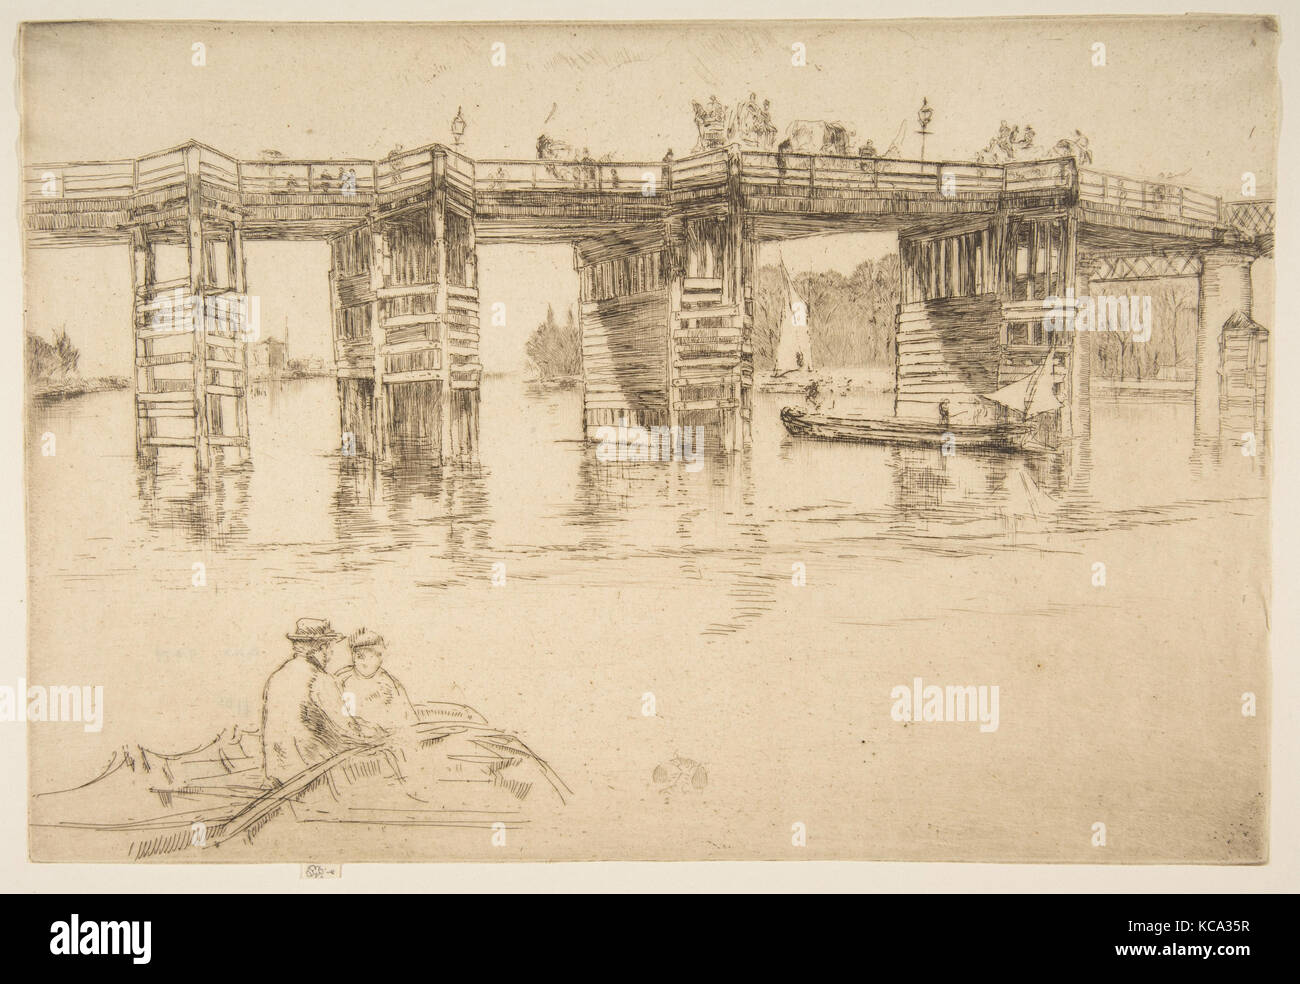 Old Putney Bridge, 1879, Etching and drypoint; seventh state of seven (Glasgow); printed in dark brown ink on ivory laid paper Stock Photo